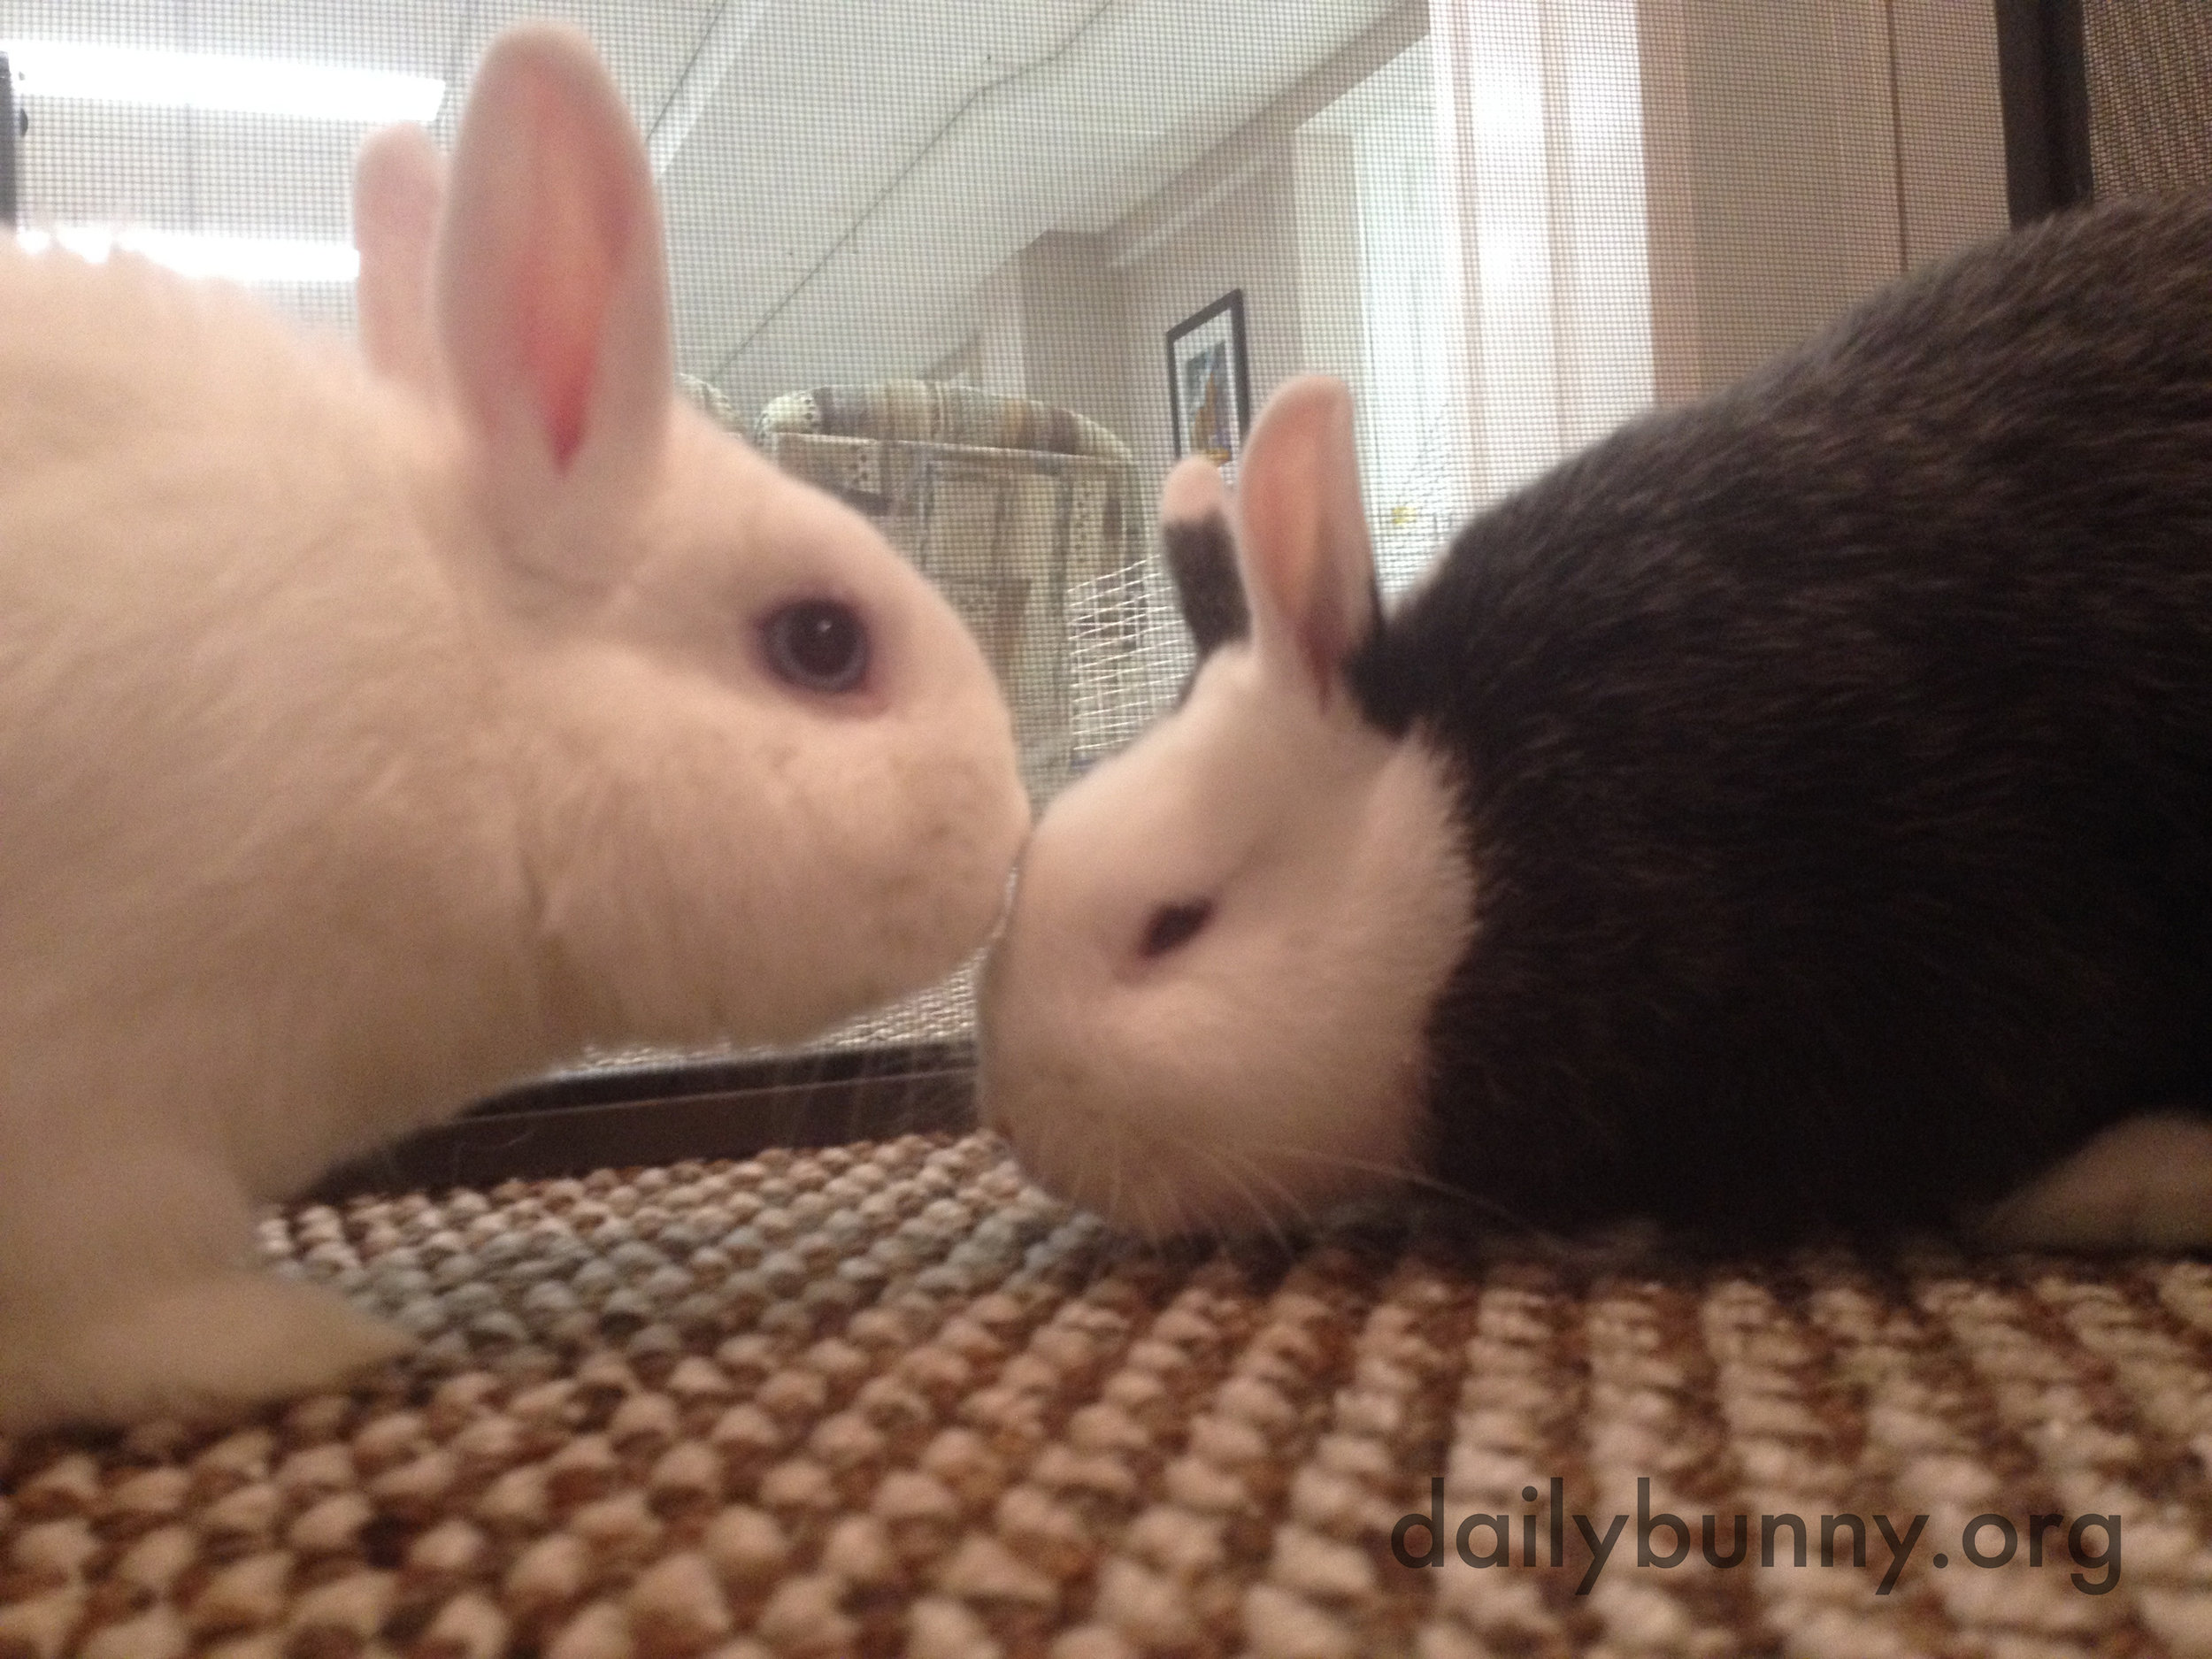 Bonding Bunnies Practice Kisses and Snuggling 1